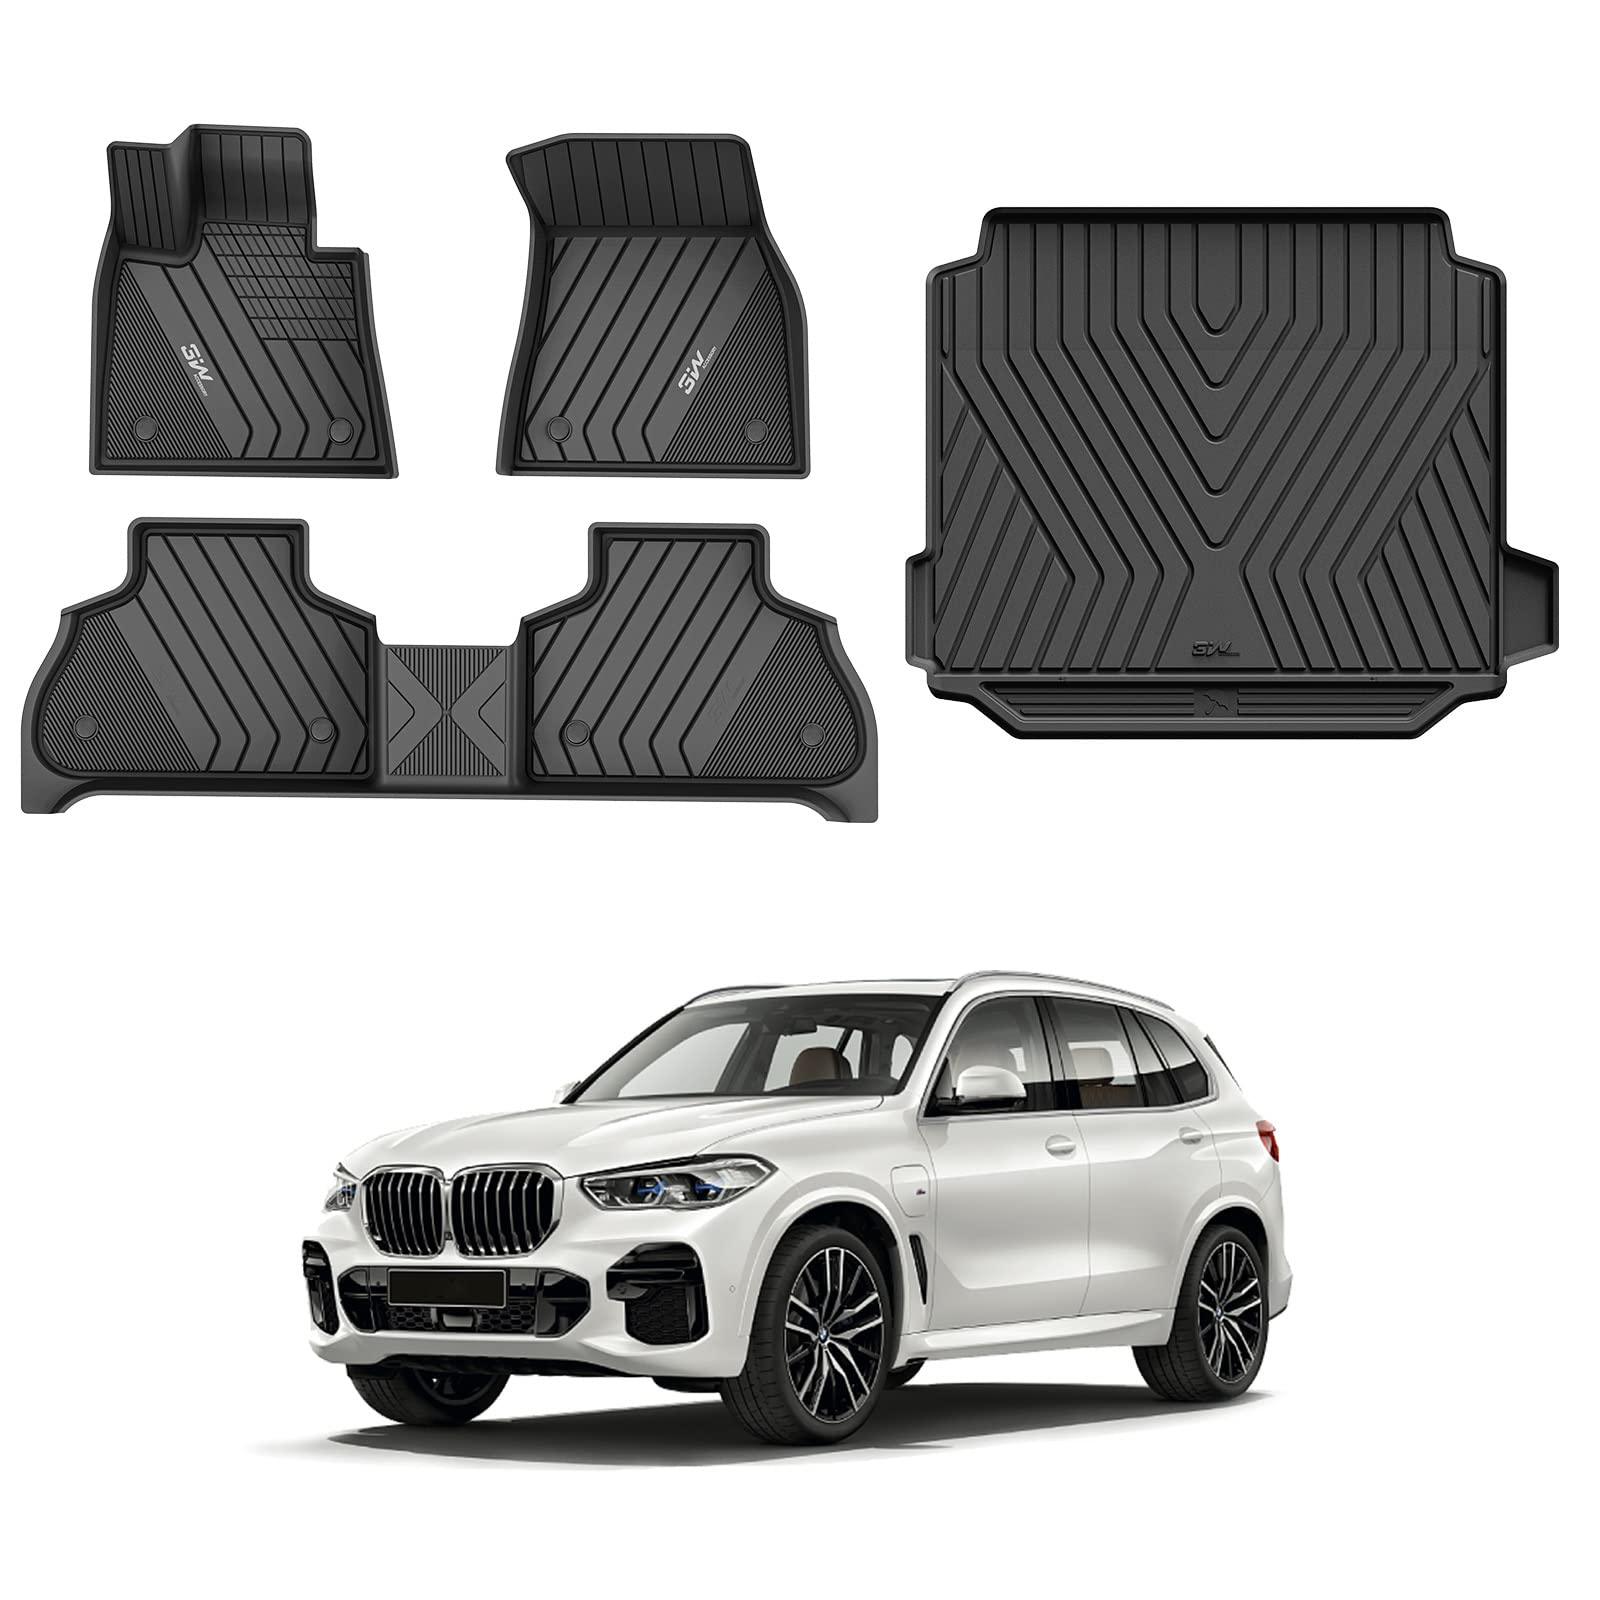 3W BMW X5 2019-2025 Custom Floor Mats / Trunk Mat TPE Material & All-Weather Protection Vehicles & Parts 3Wliners 2019-2025 X5 2019-2025 1st&2nd Row Mats+Trunk Mat